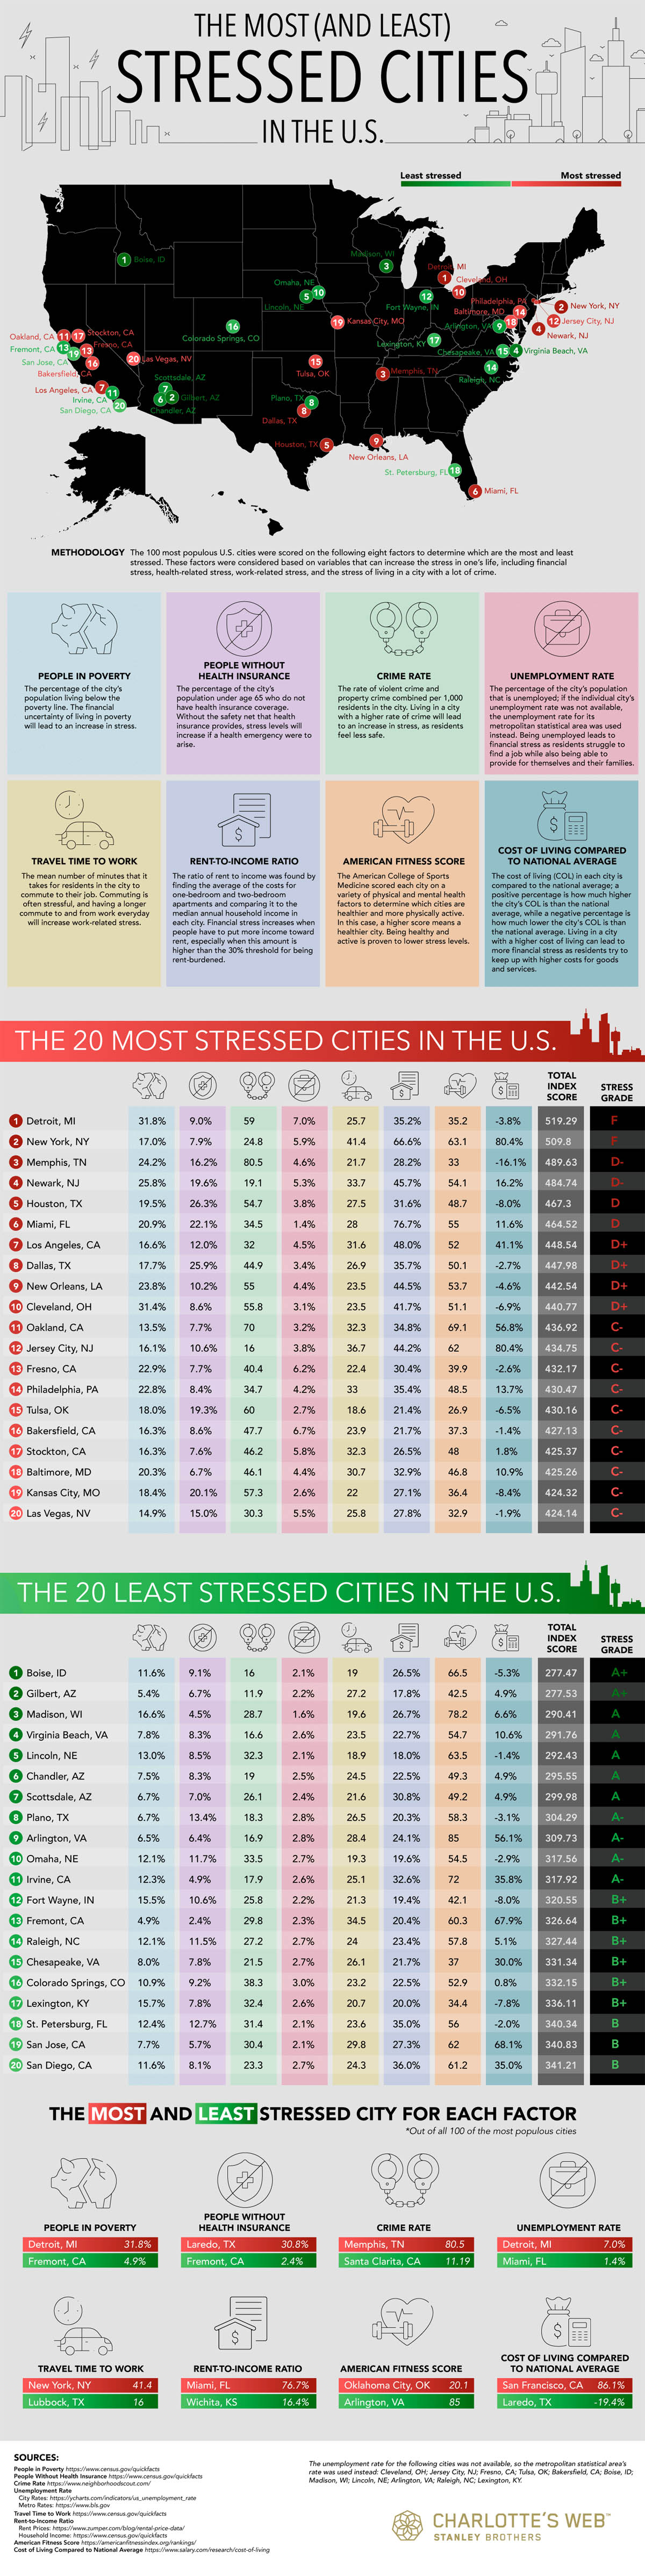 The Most (and Least) Stressed Cities in the U.S.